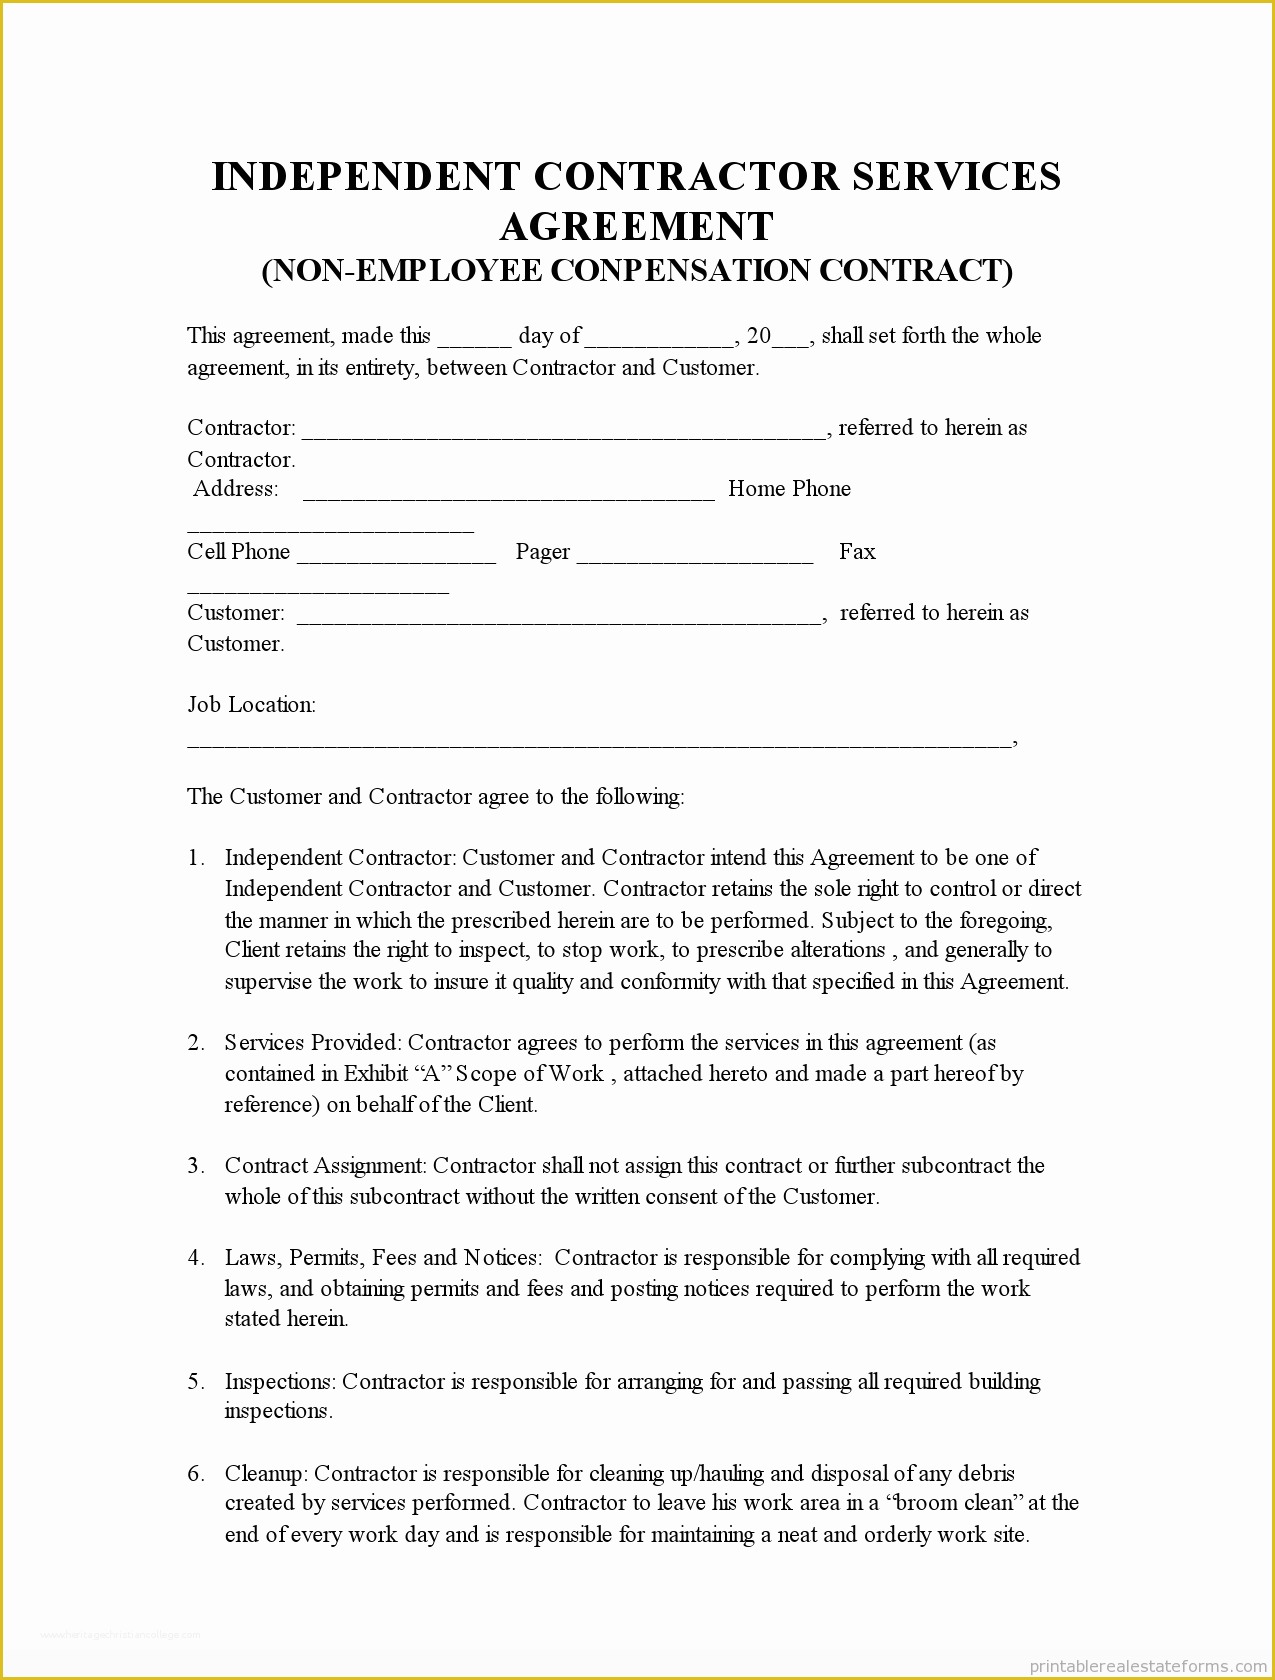 Free Contractor Contract Template Of Sample Printable Indep Contractor Agreement 2 form